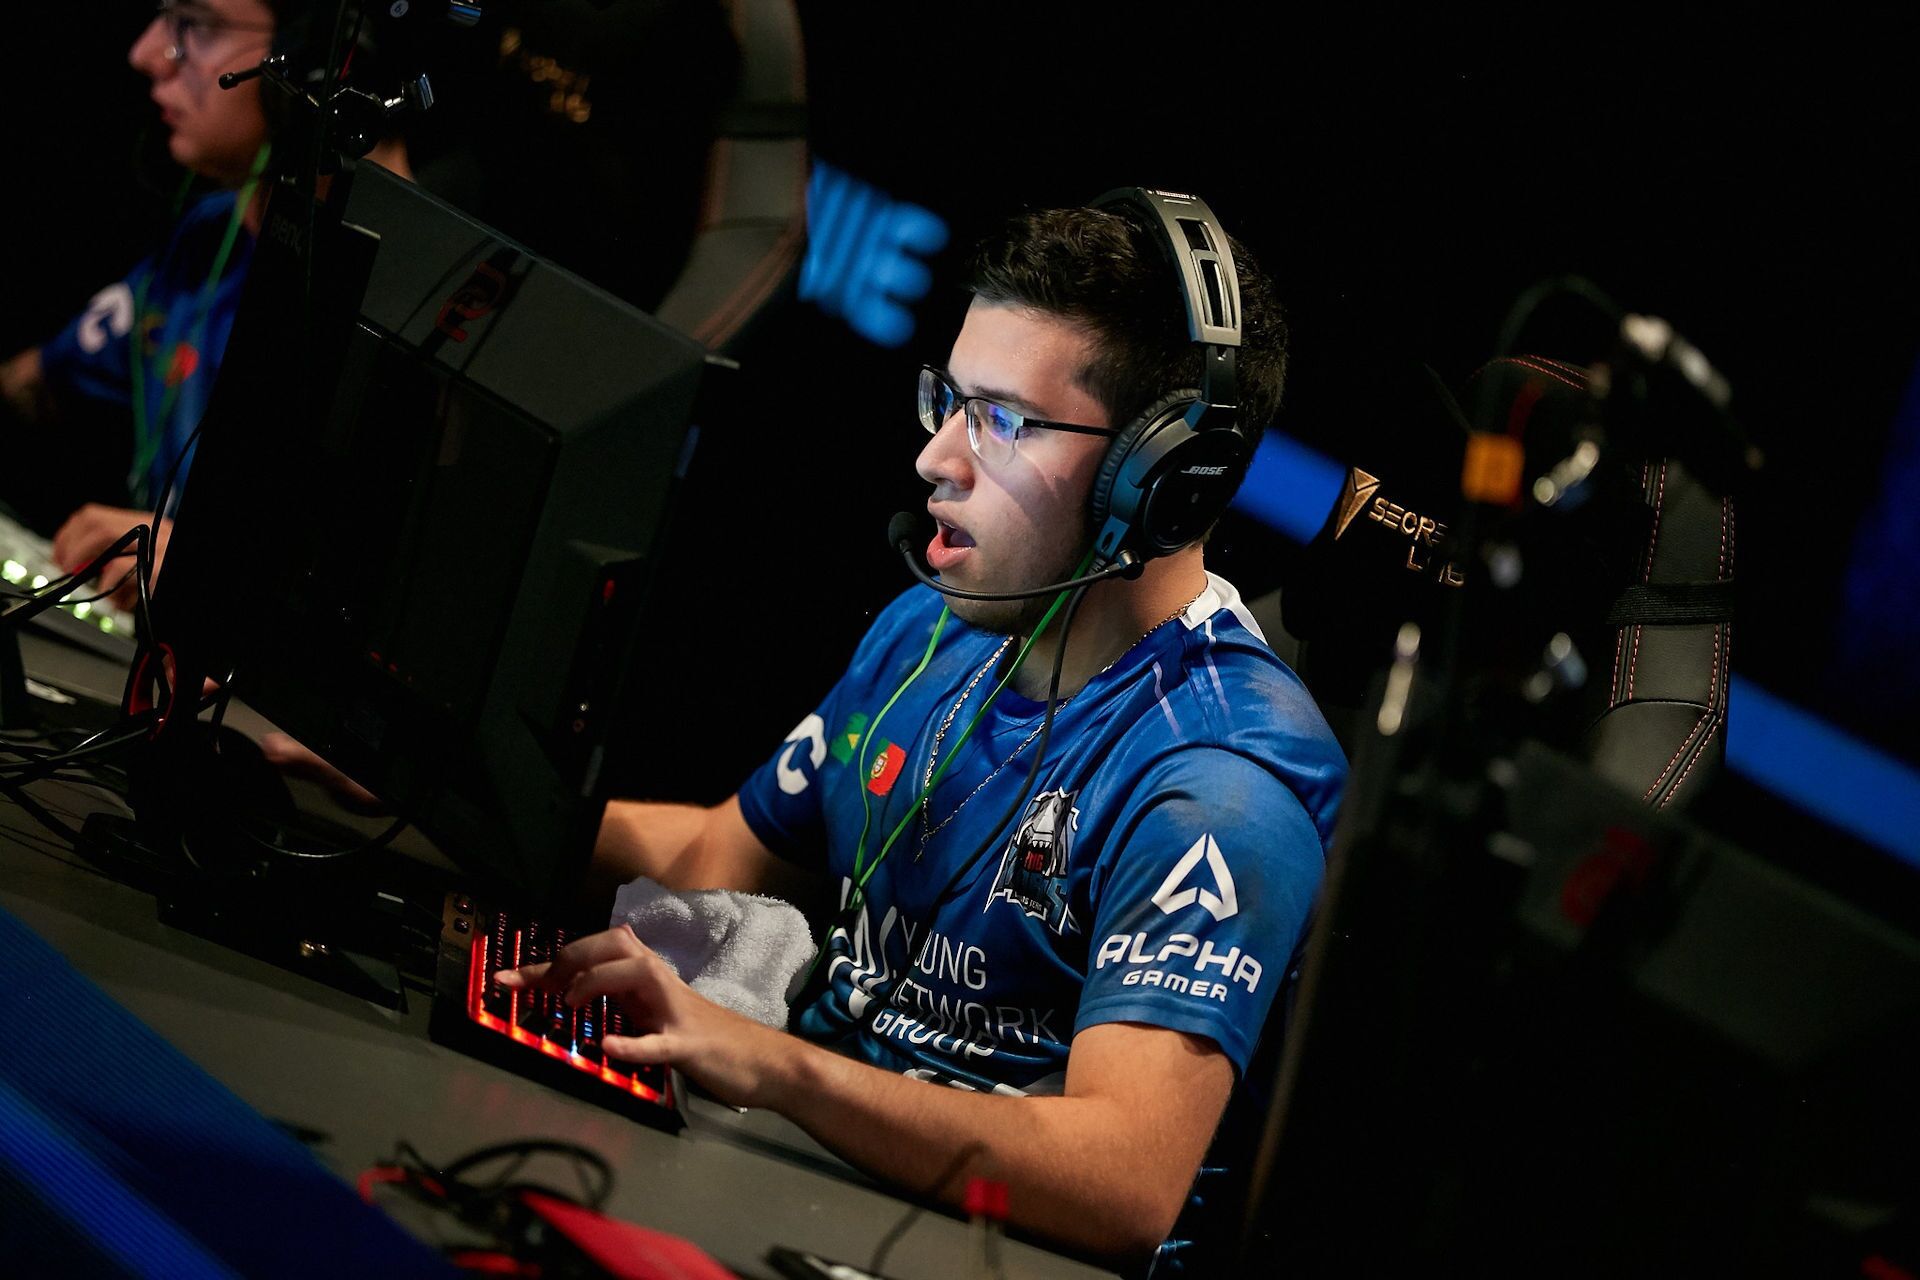 leo_drk is one of the promising Brazilian CS:GO talents joining MiBR as a temporary player (Photo via StarLadder)